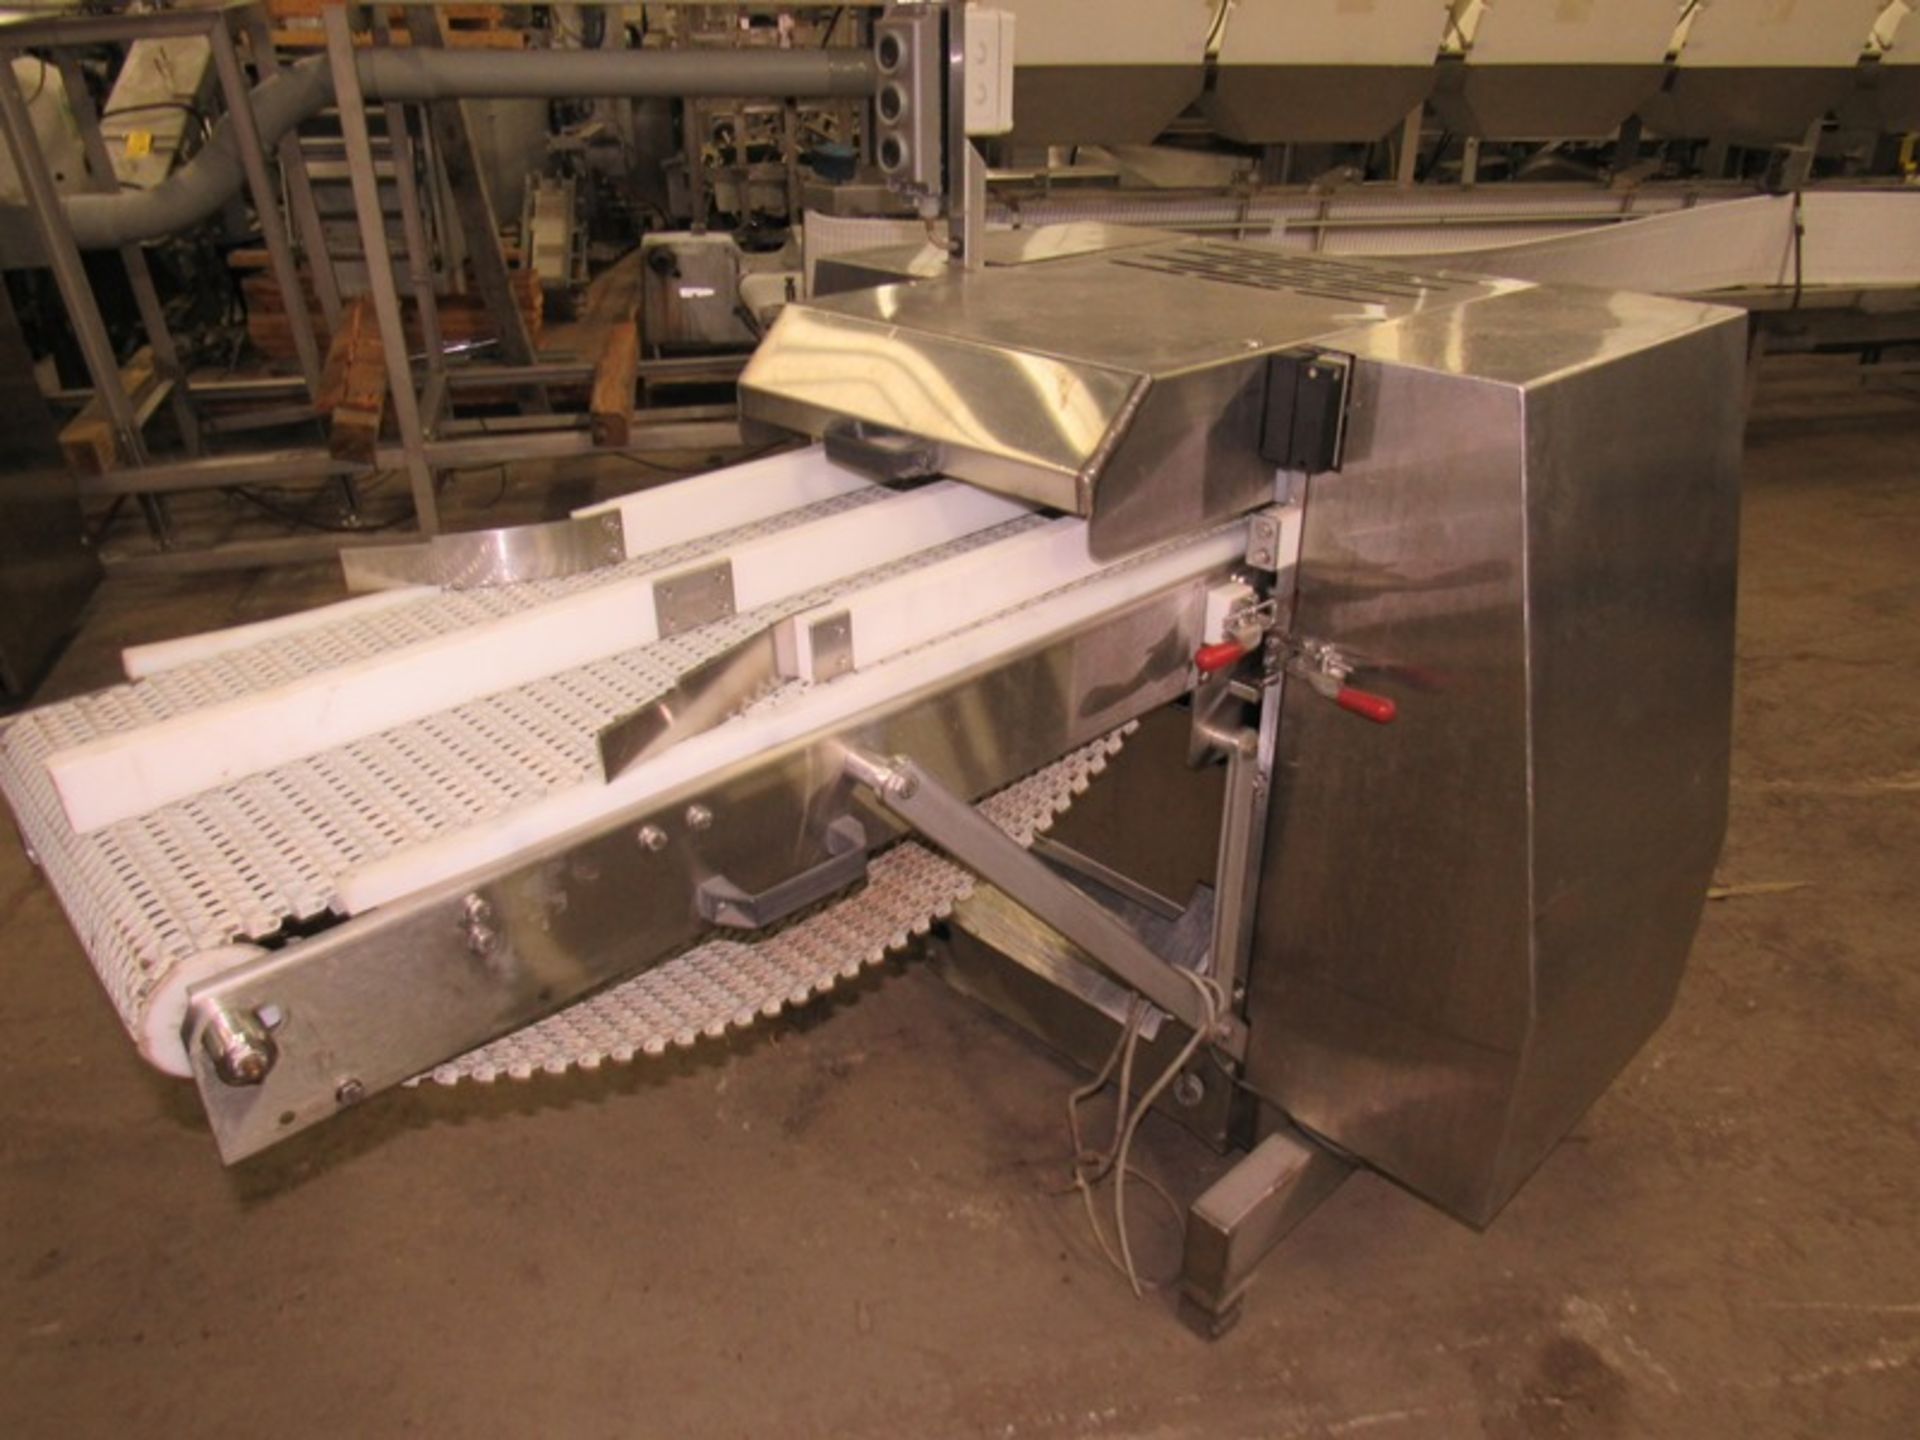 Baader Mdl. 620 Conveyorized Fish Skinner, 15" wide X 46" long infeed conveyor, 1.5 h.p., 480 volts, - Image 2 of 8